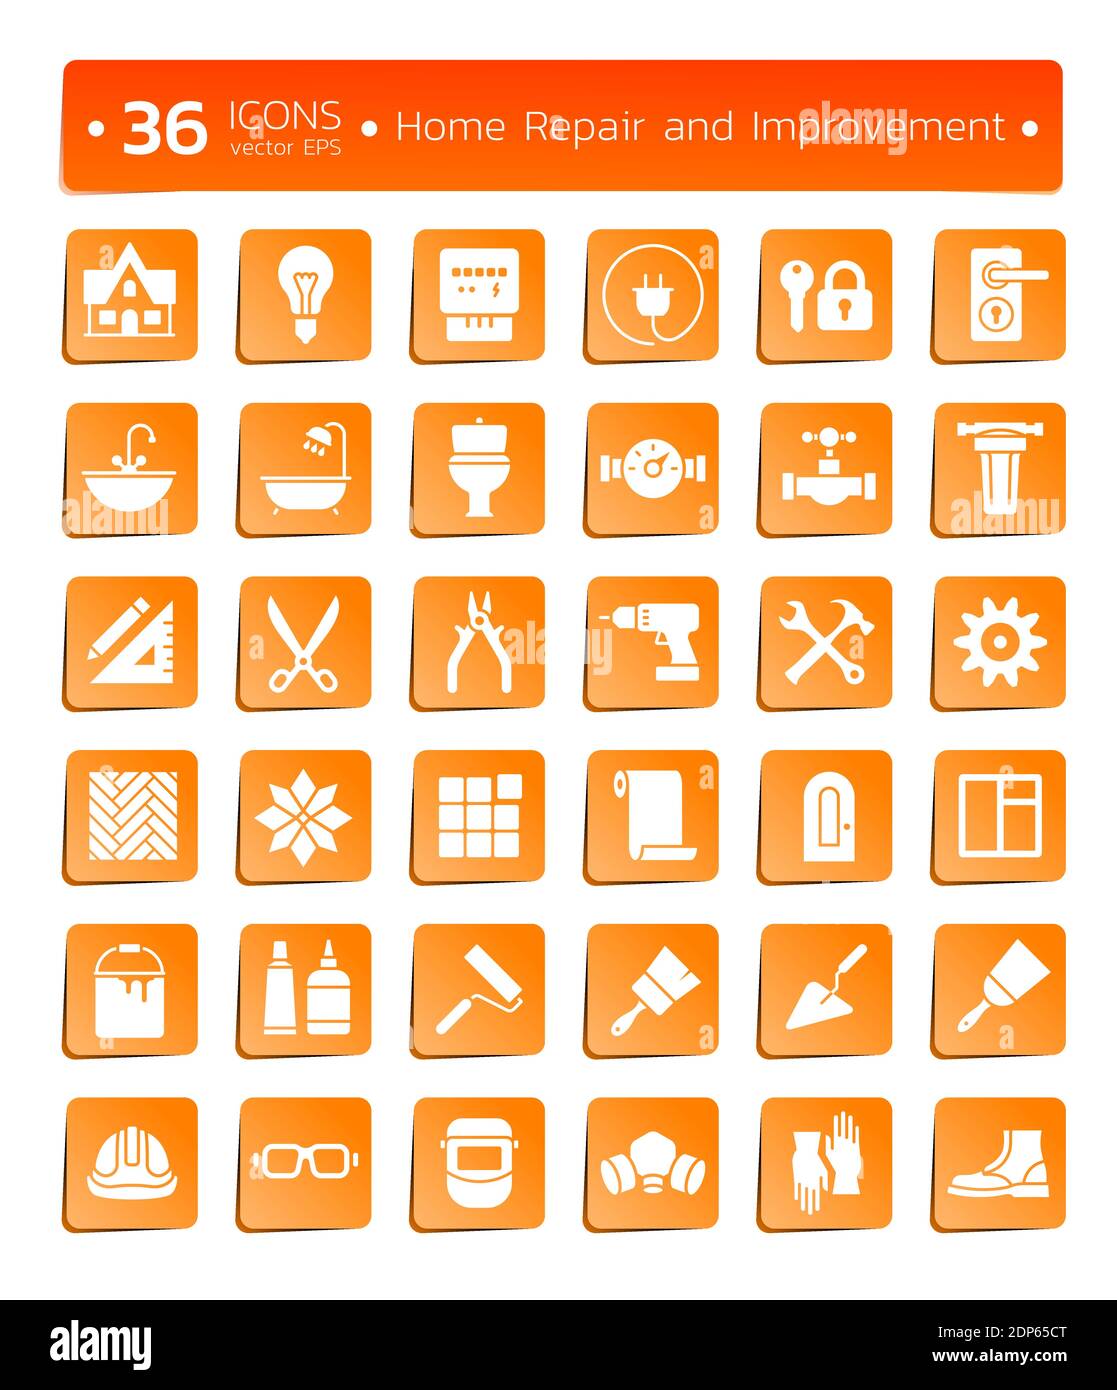 Home Repair and Improvement Icons Stock Vector